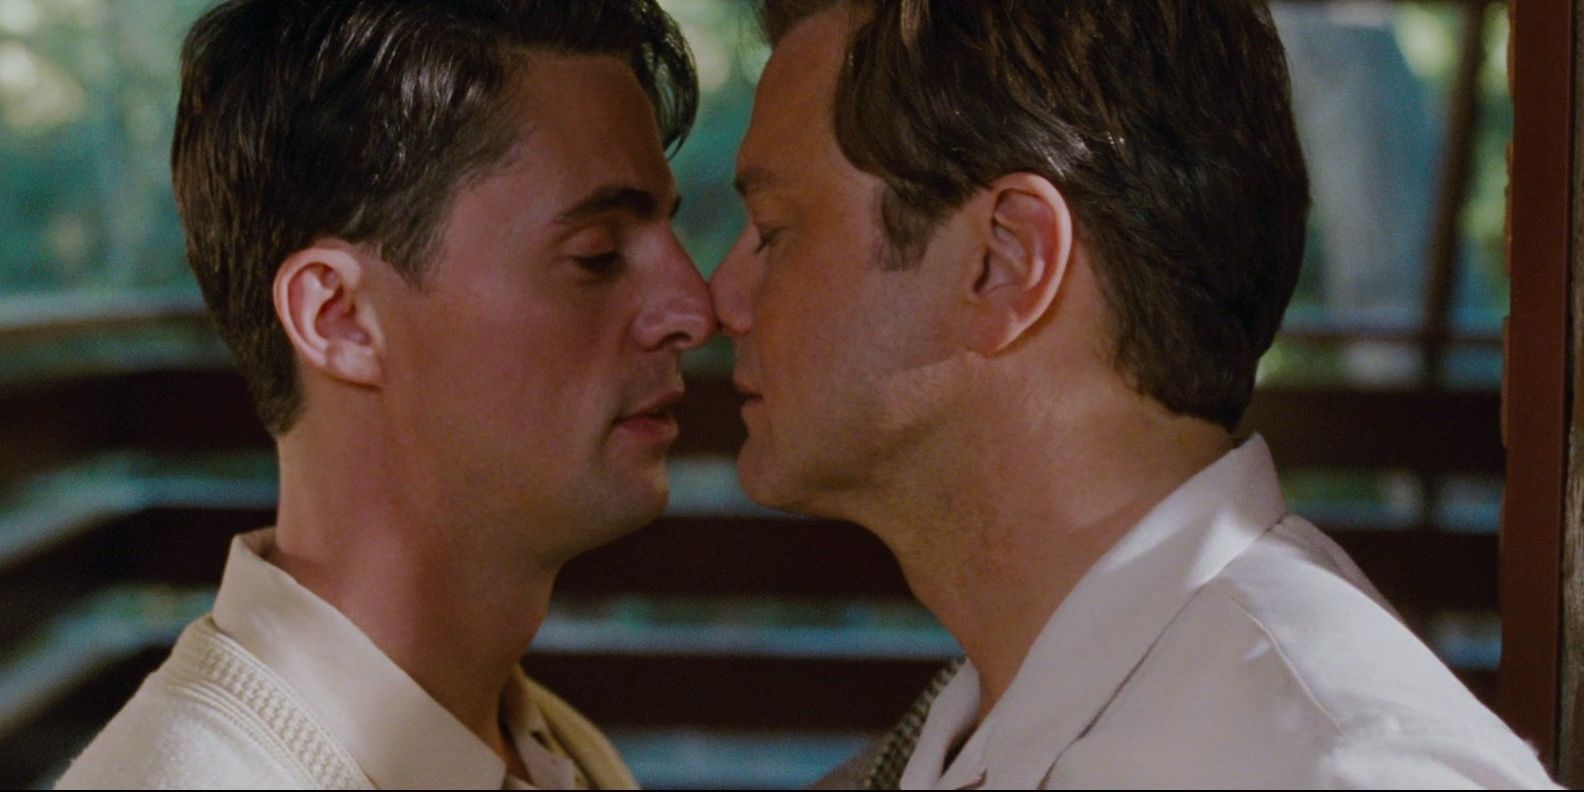 Colin Firth and Matthew Goode about to kiss in A Single Man